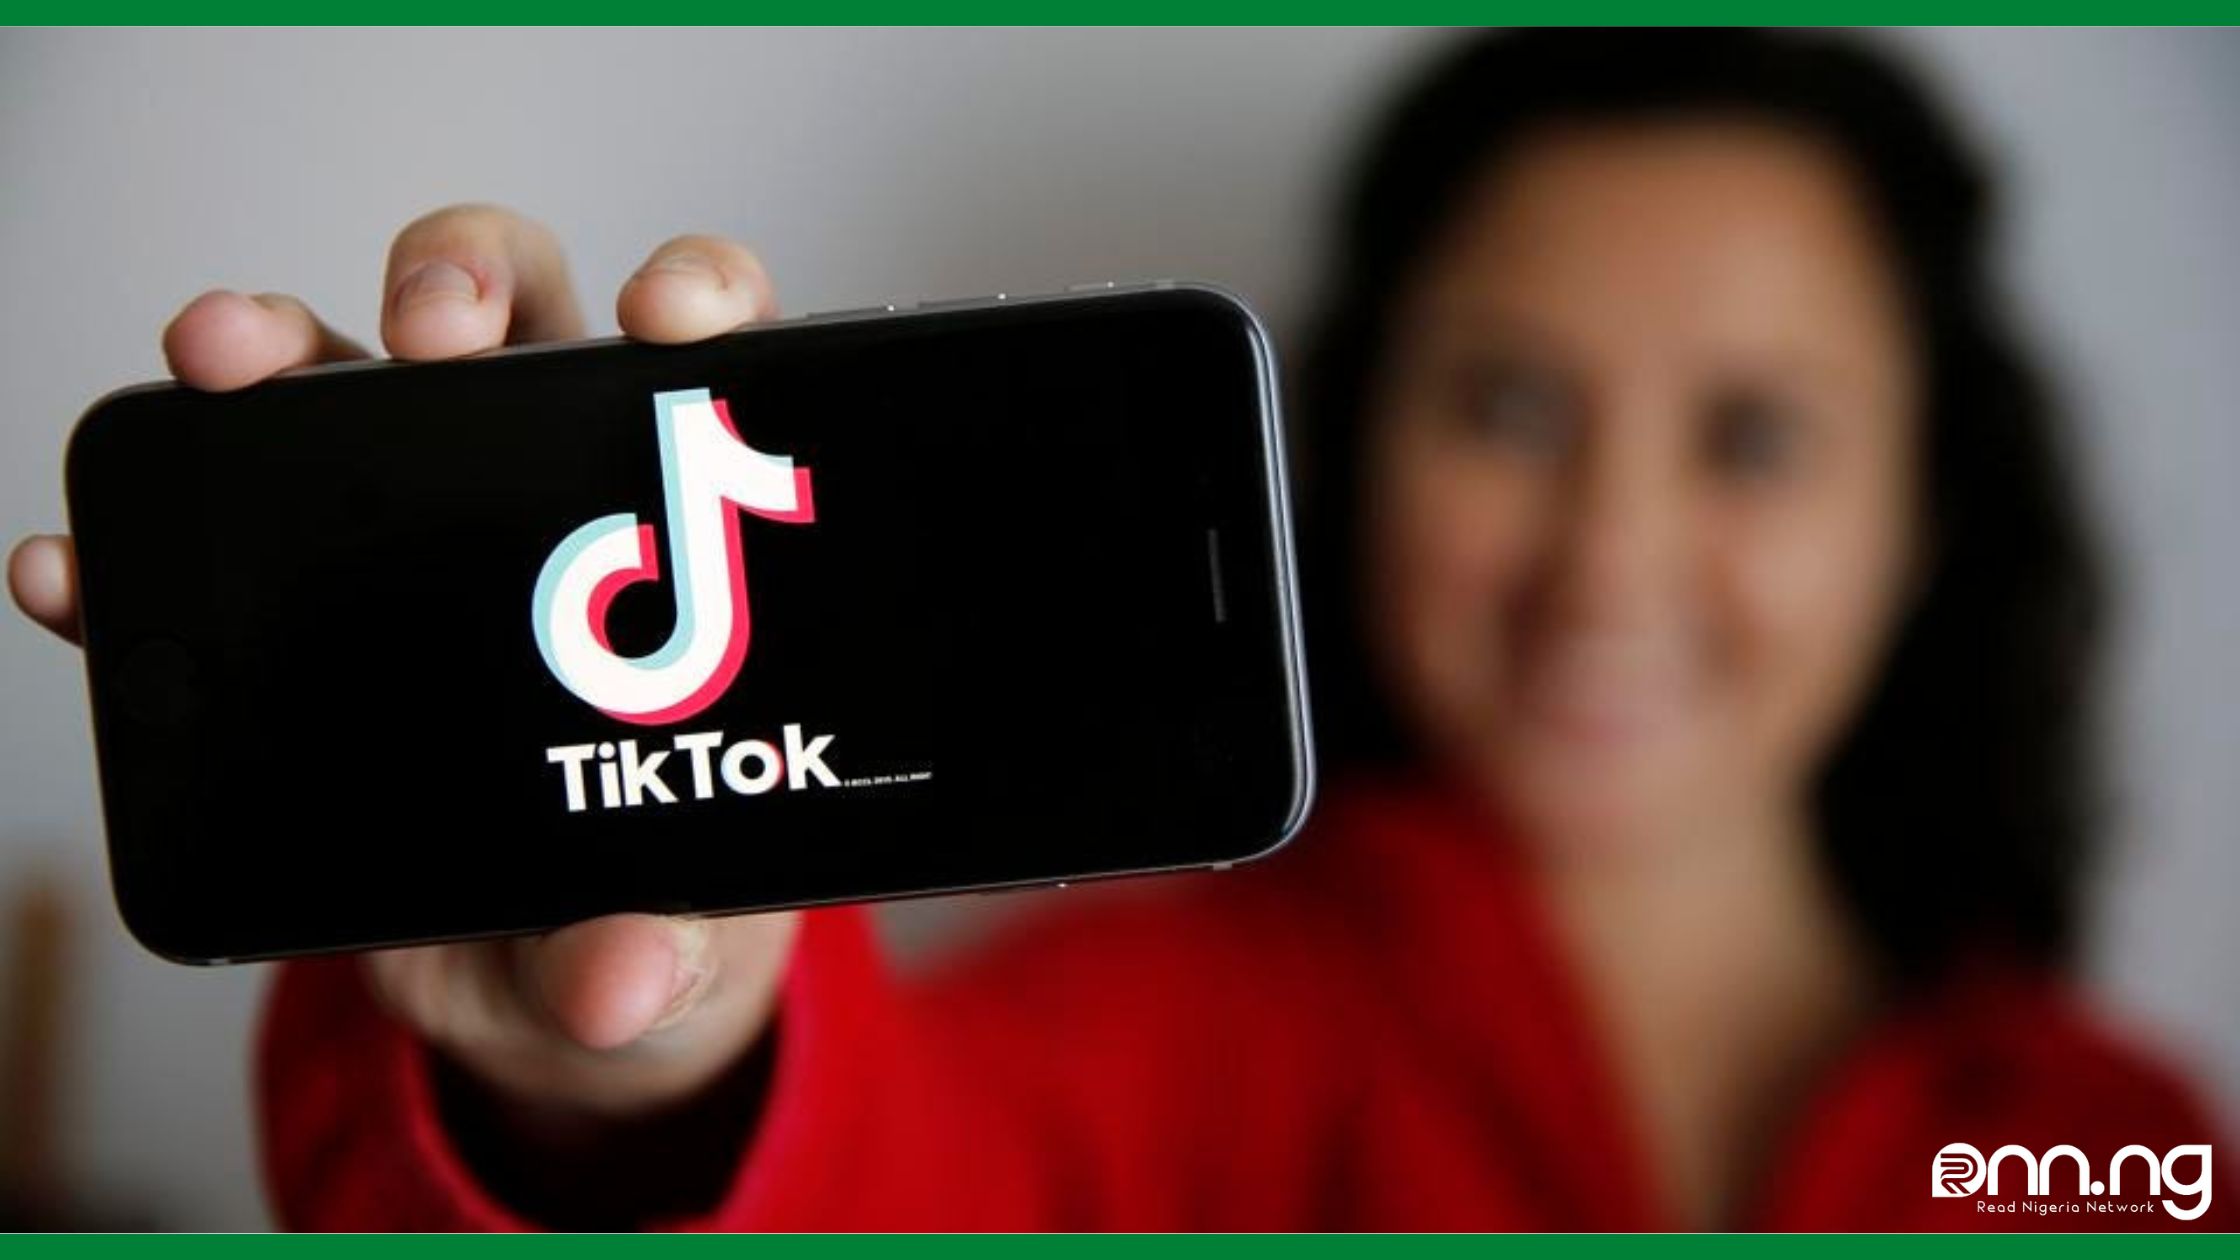 Woman showing a mobile Phone with TikTok Logo displayed on its screen